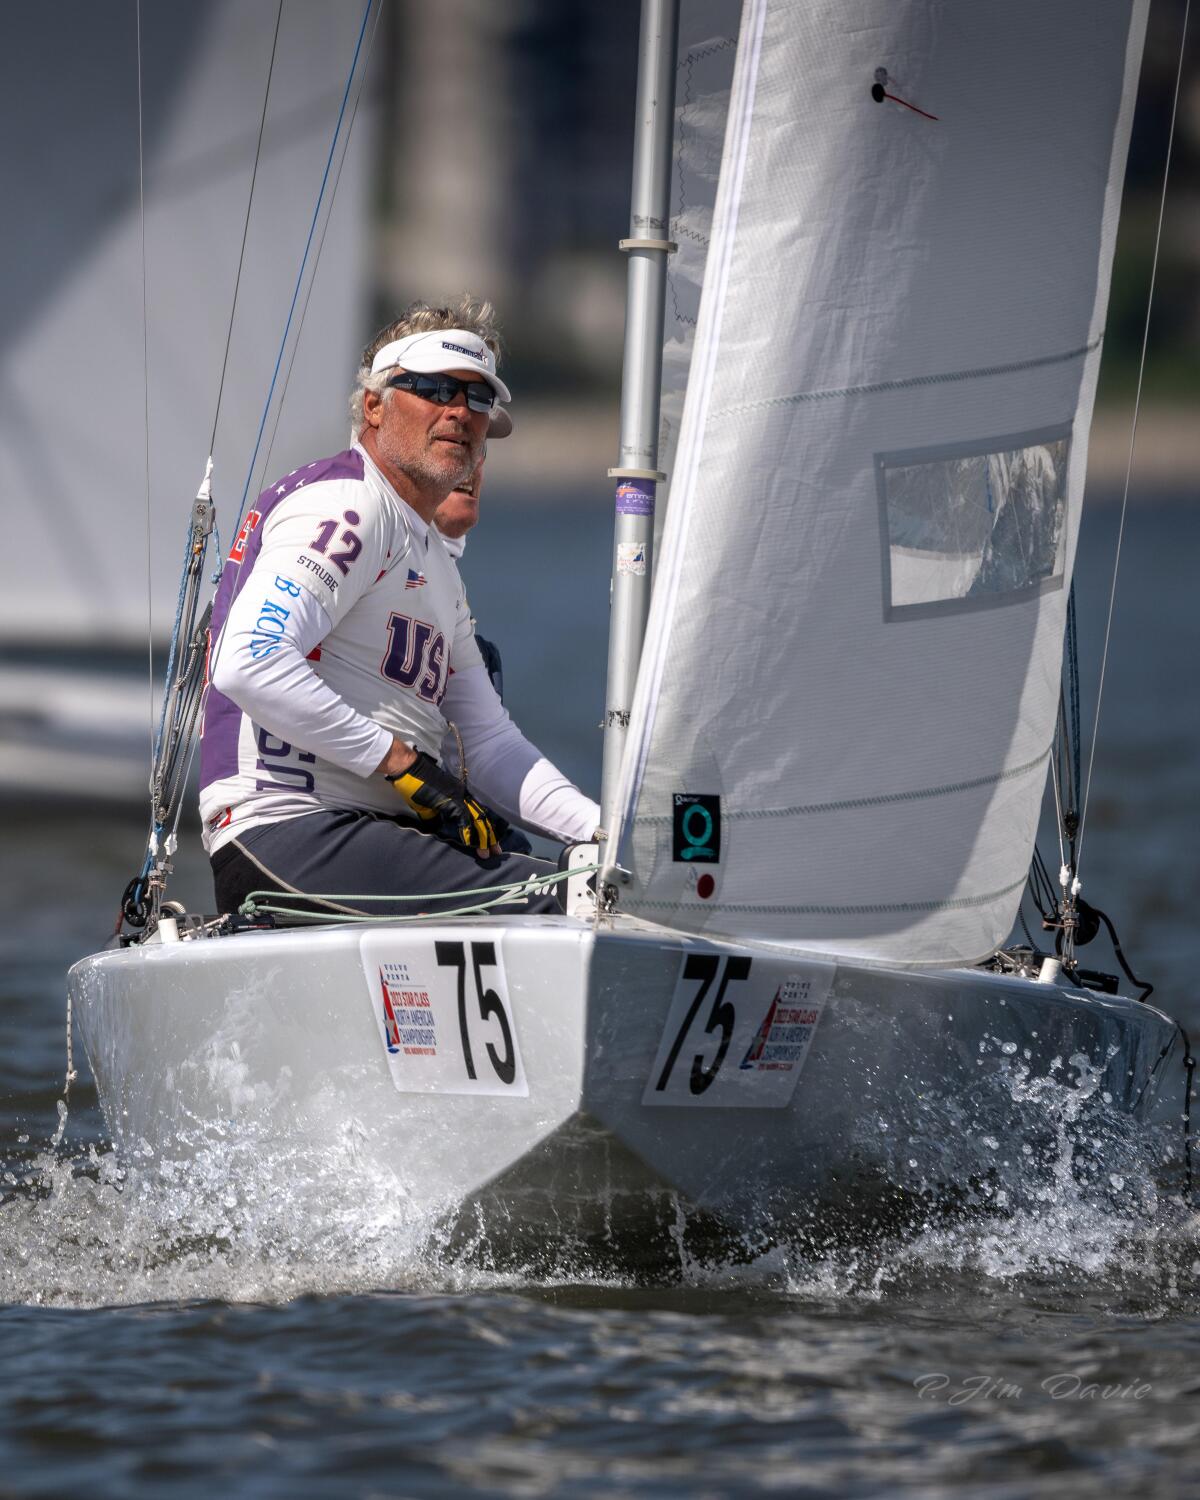 La Jolla resident Mark Strube says he has been to 43 countries to sail or train, competing in five to 10 races a year.